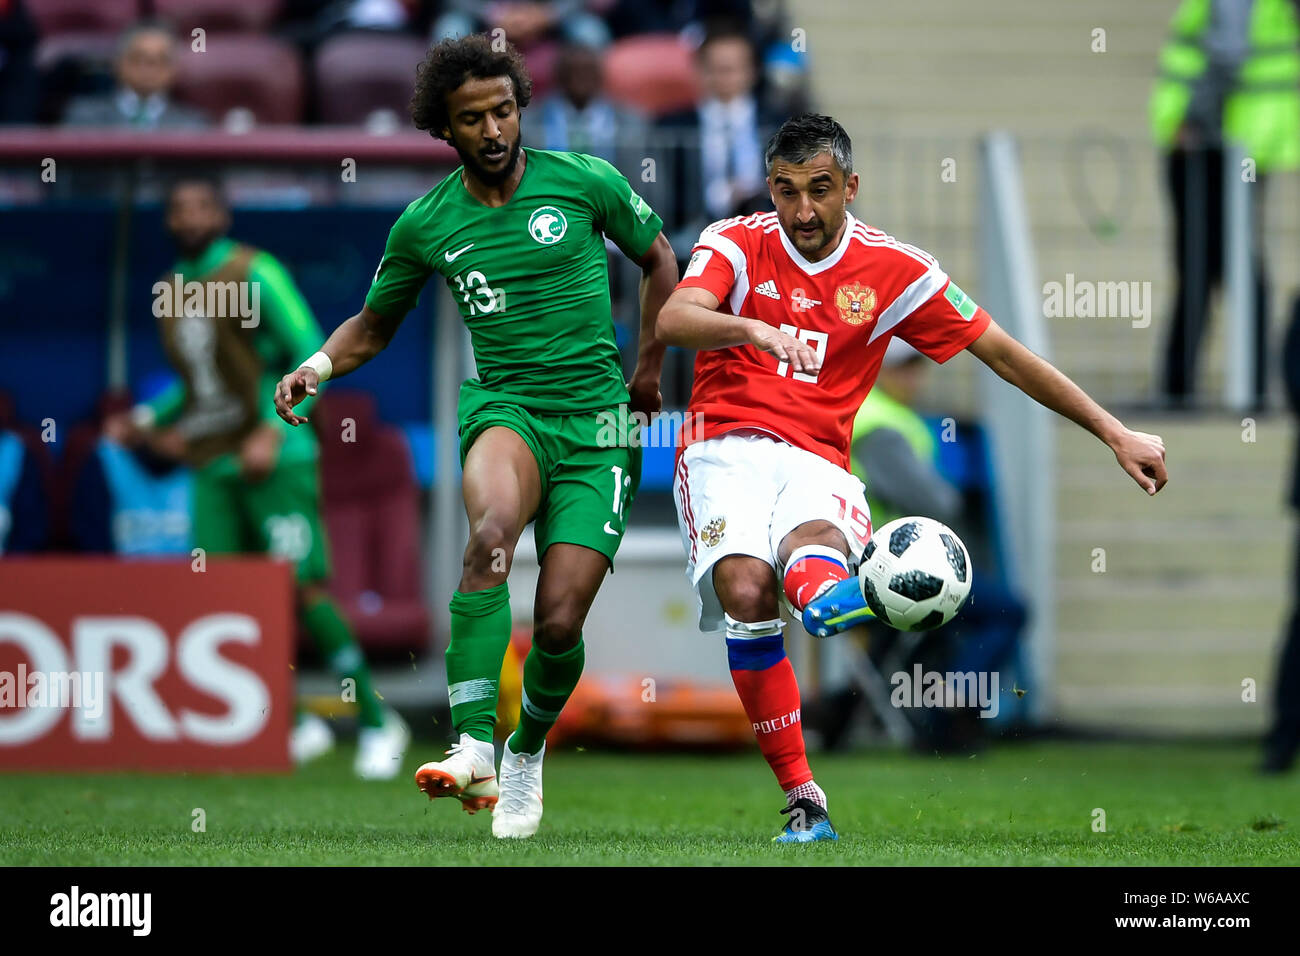 Aleksandr Samedov of Russia, right, challenges Yasser Al-Shahrani of Saudi Arabia in their Group A match during the 2018 FIFA World Cup in Moscow, Rus Stock Photo